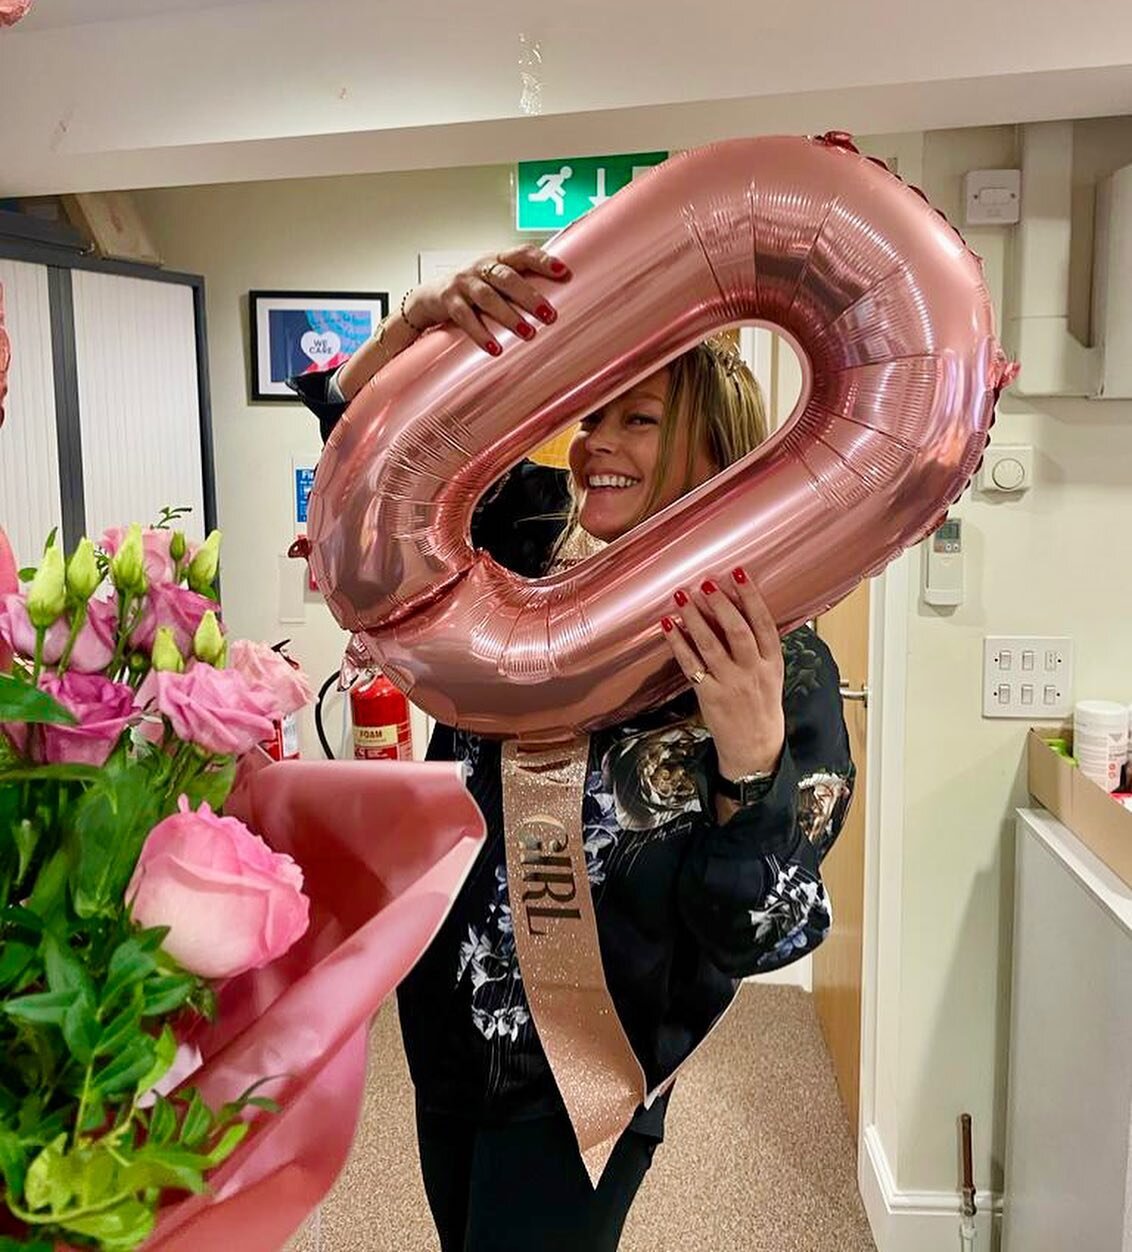 Wellburn would like to wish our Chairperson, Rachel, a very happy 50th birthday which she celebrated yesterday! 🎉

We hope you had a fabulous day and enjoyed all the lovely flowers, gifts and cards you received 💐💝

#happybirthday #birthdaycelebrat